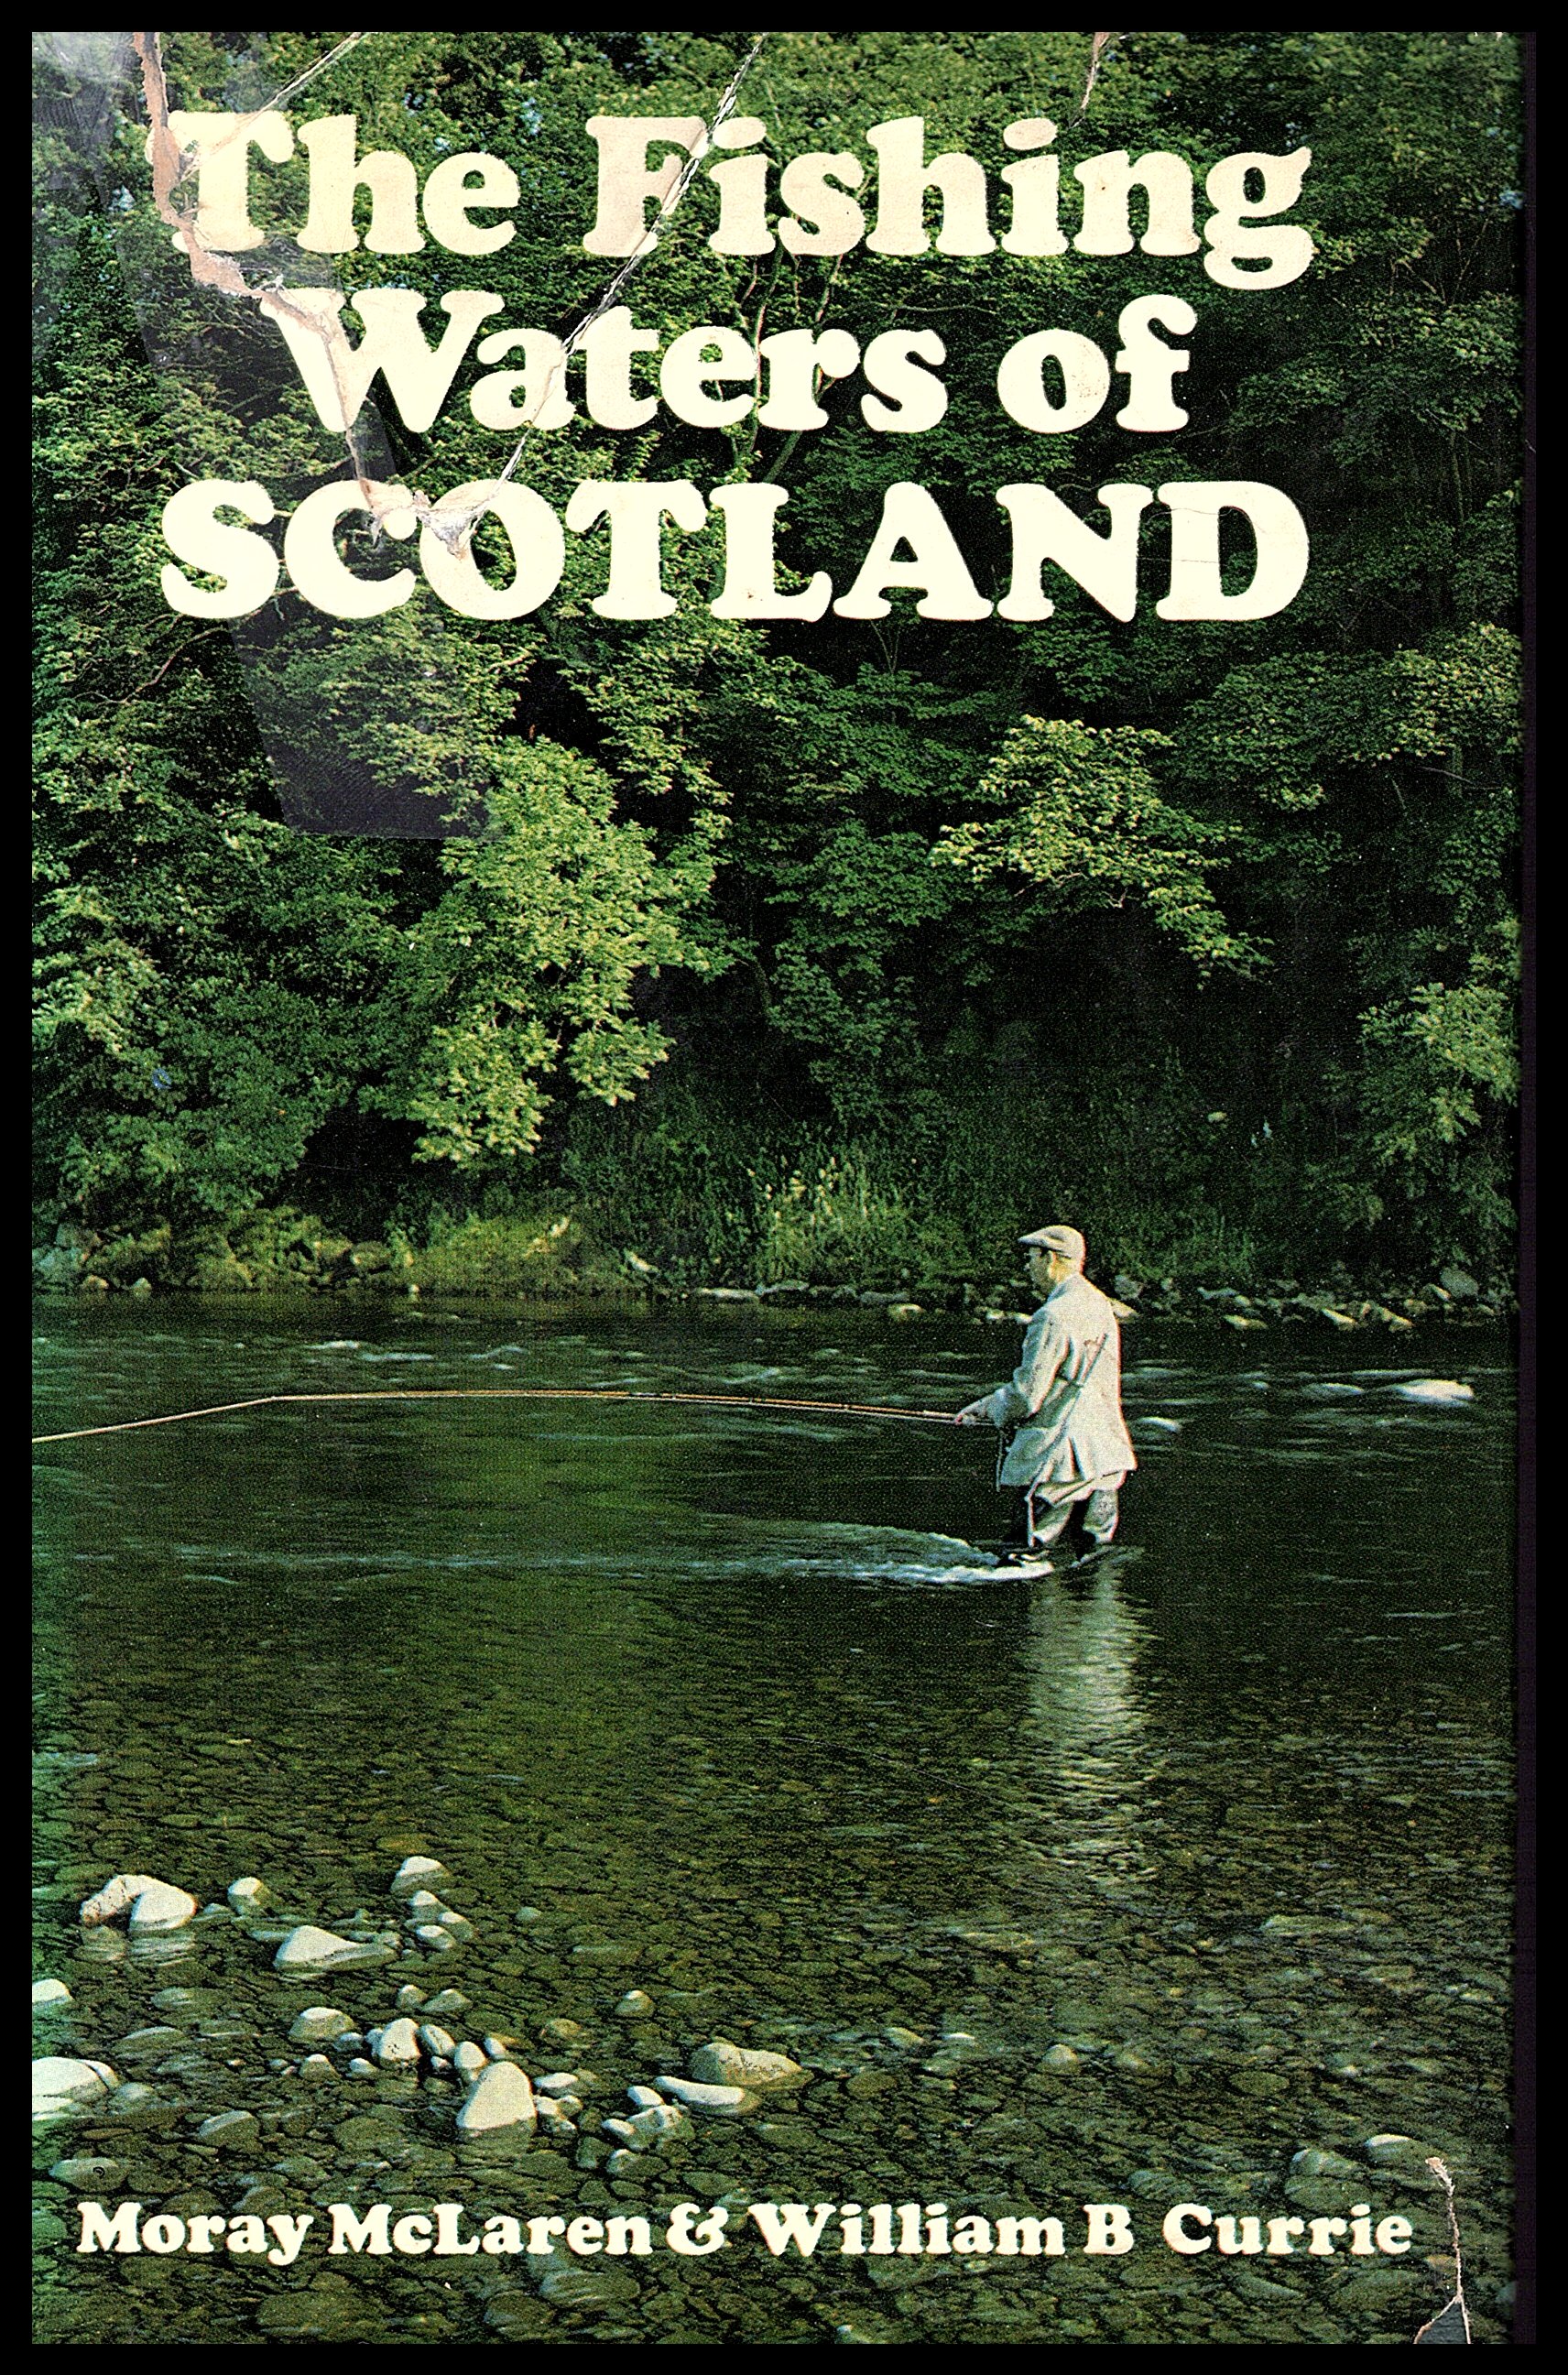 The Fishing Waters of Scotland by McLaren & Murray -- 1972 by Mora McLaren  and William B Currie: Fine Hardcover (1972) 1st Edition